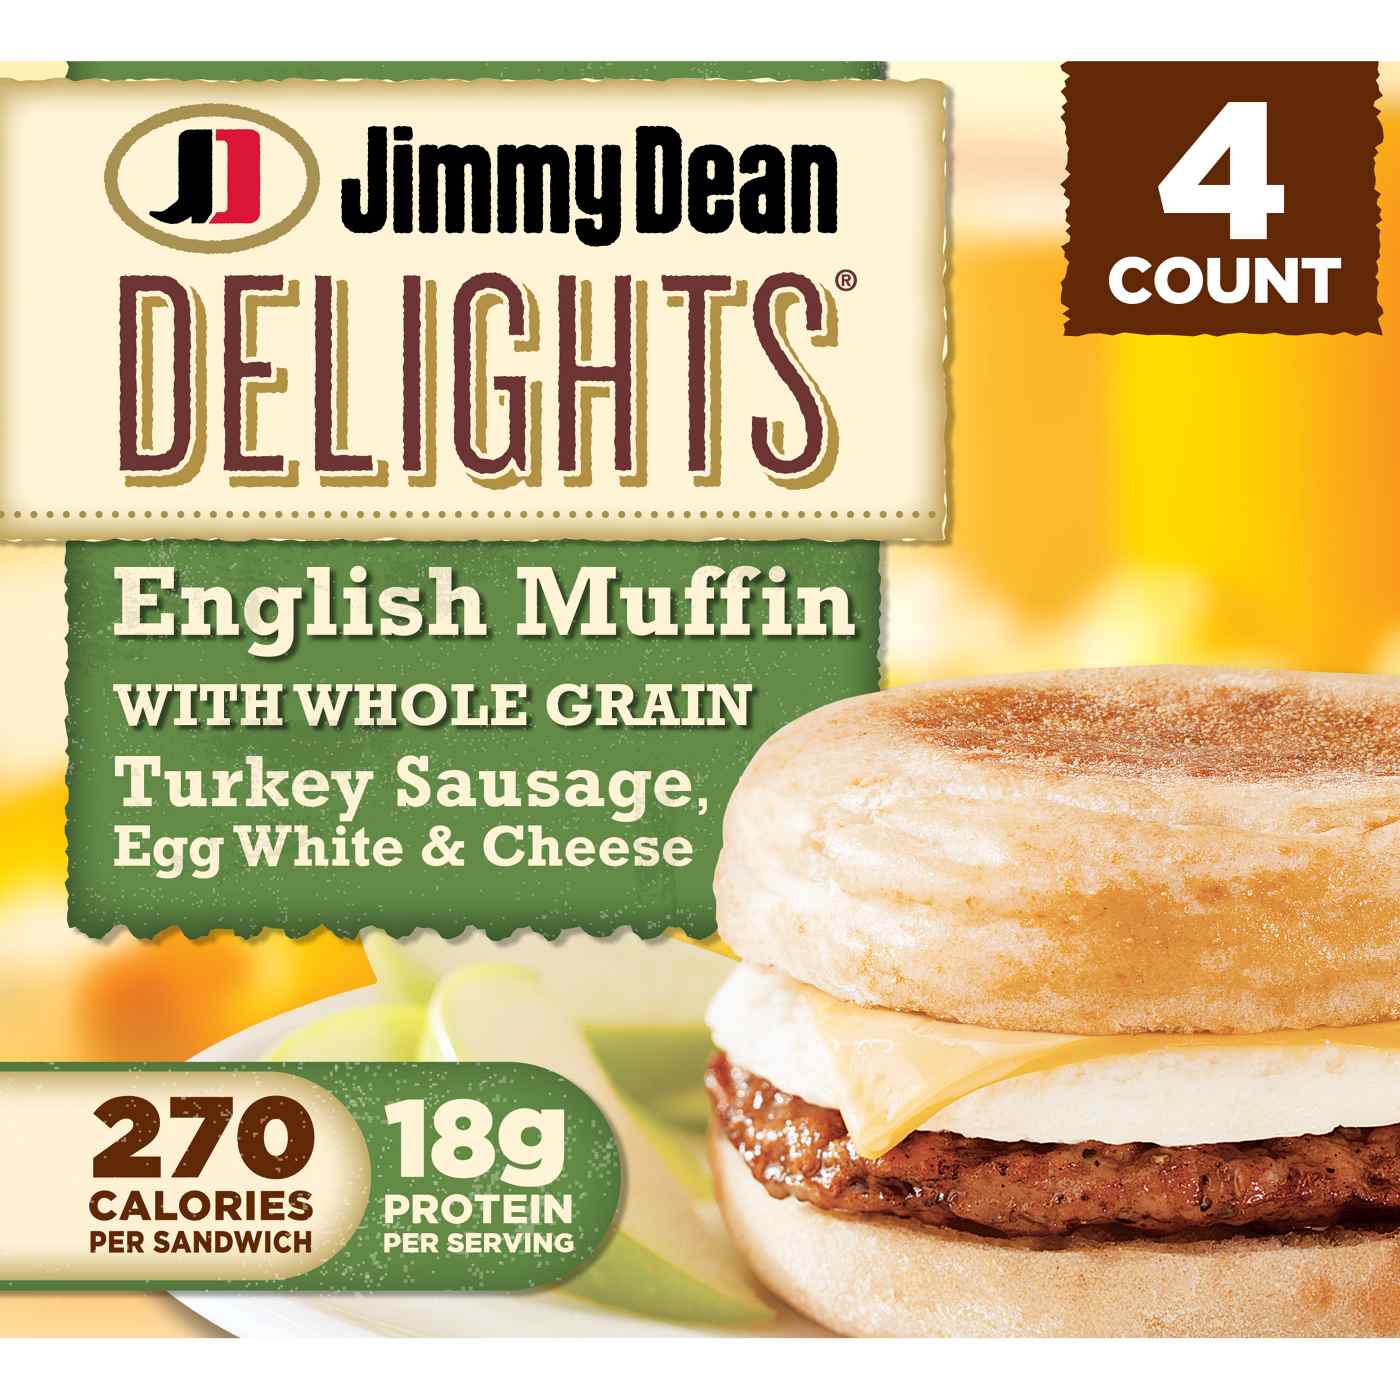 Jimmy Dean Delights Turkey Sausage, Egg White & Cheese English Muffin Breakfast Sandwiches; image 1 of 3